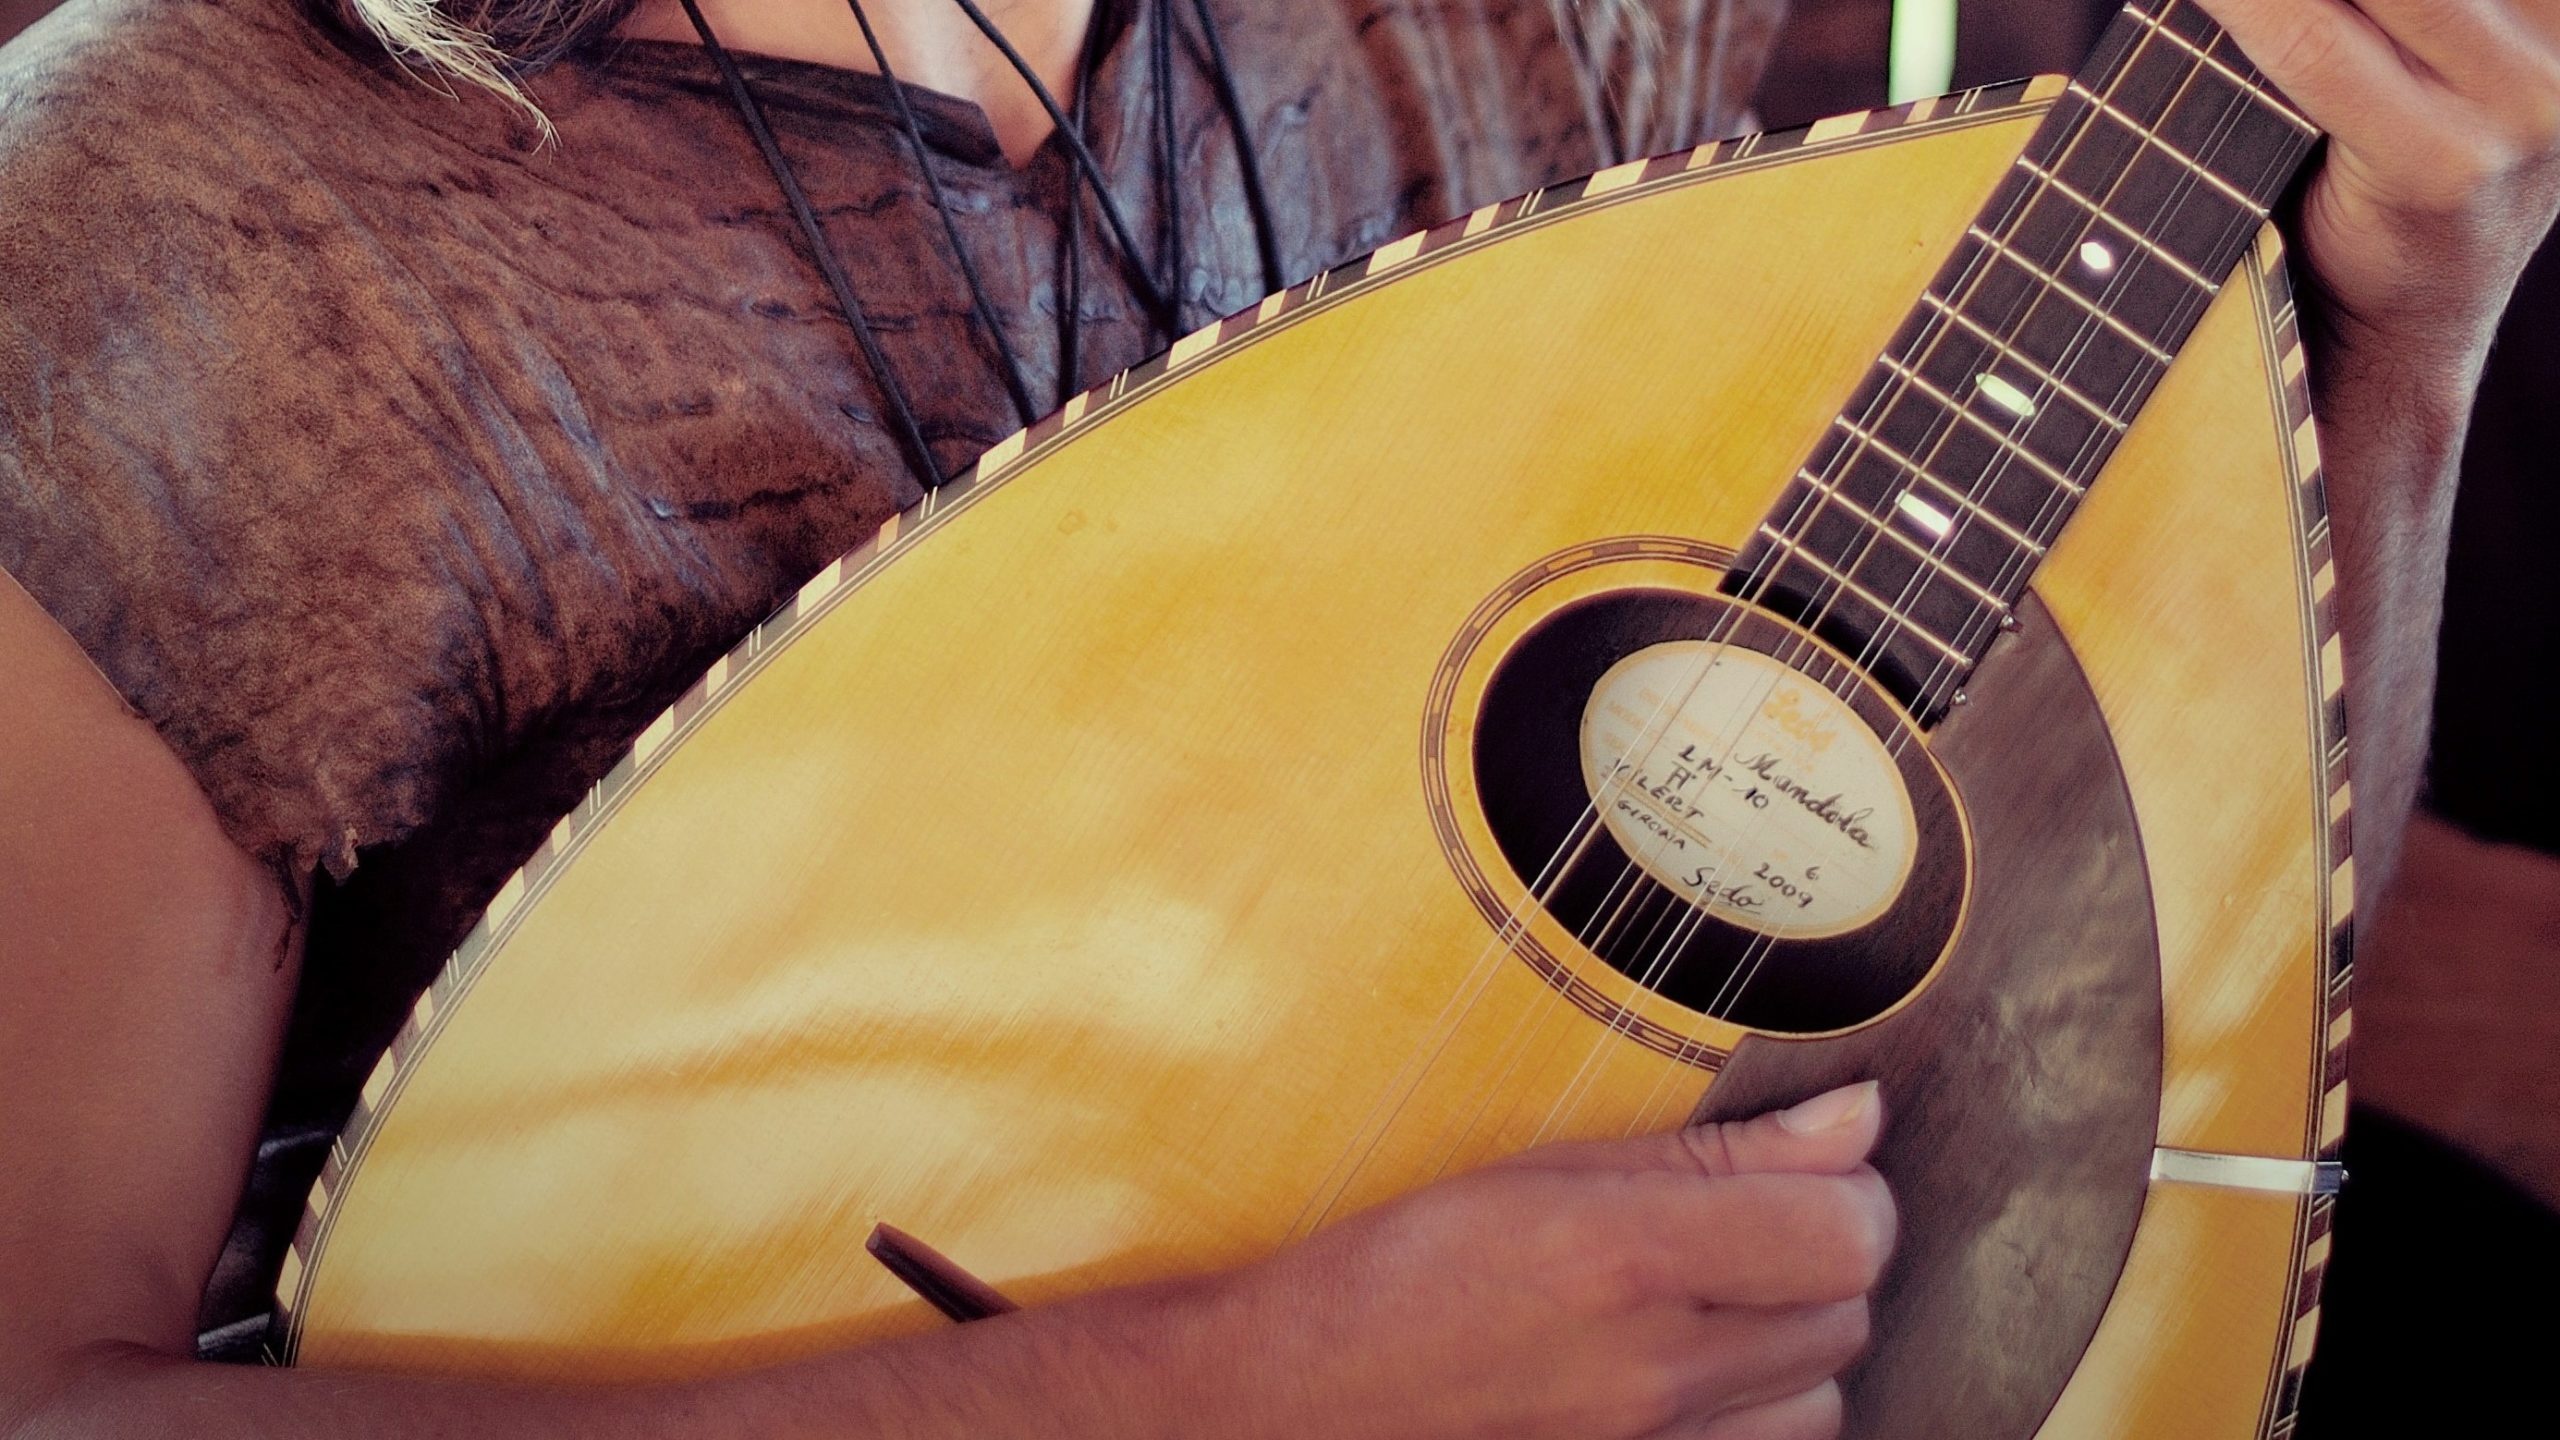 Mandola: The Neapolitan Or Round-Backed Type, The Musician Stringing, Authentic Clothing. 2560x1440 HD Wallpaper.